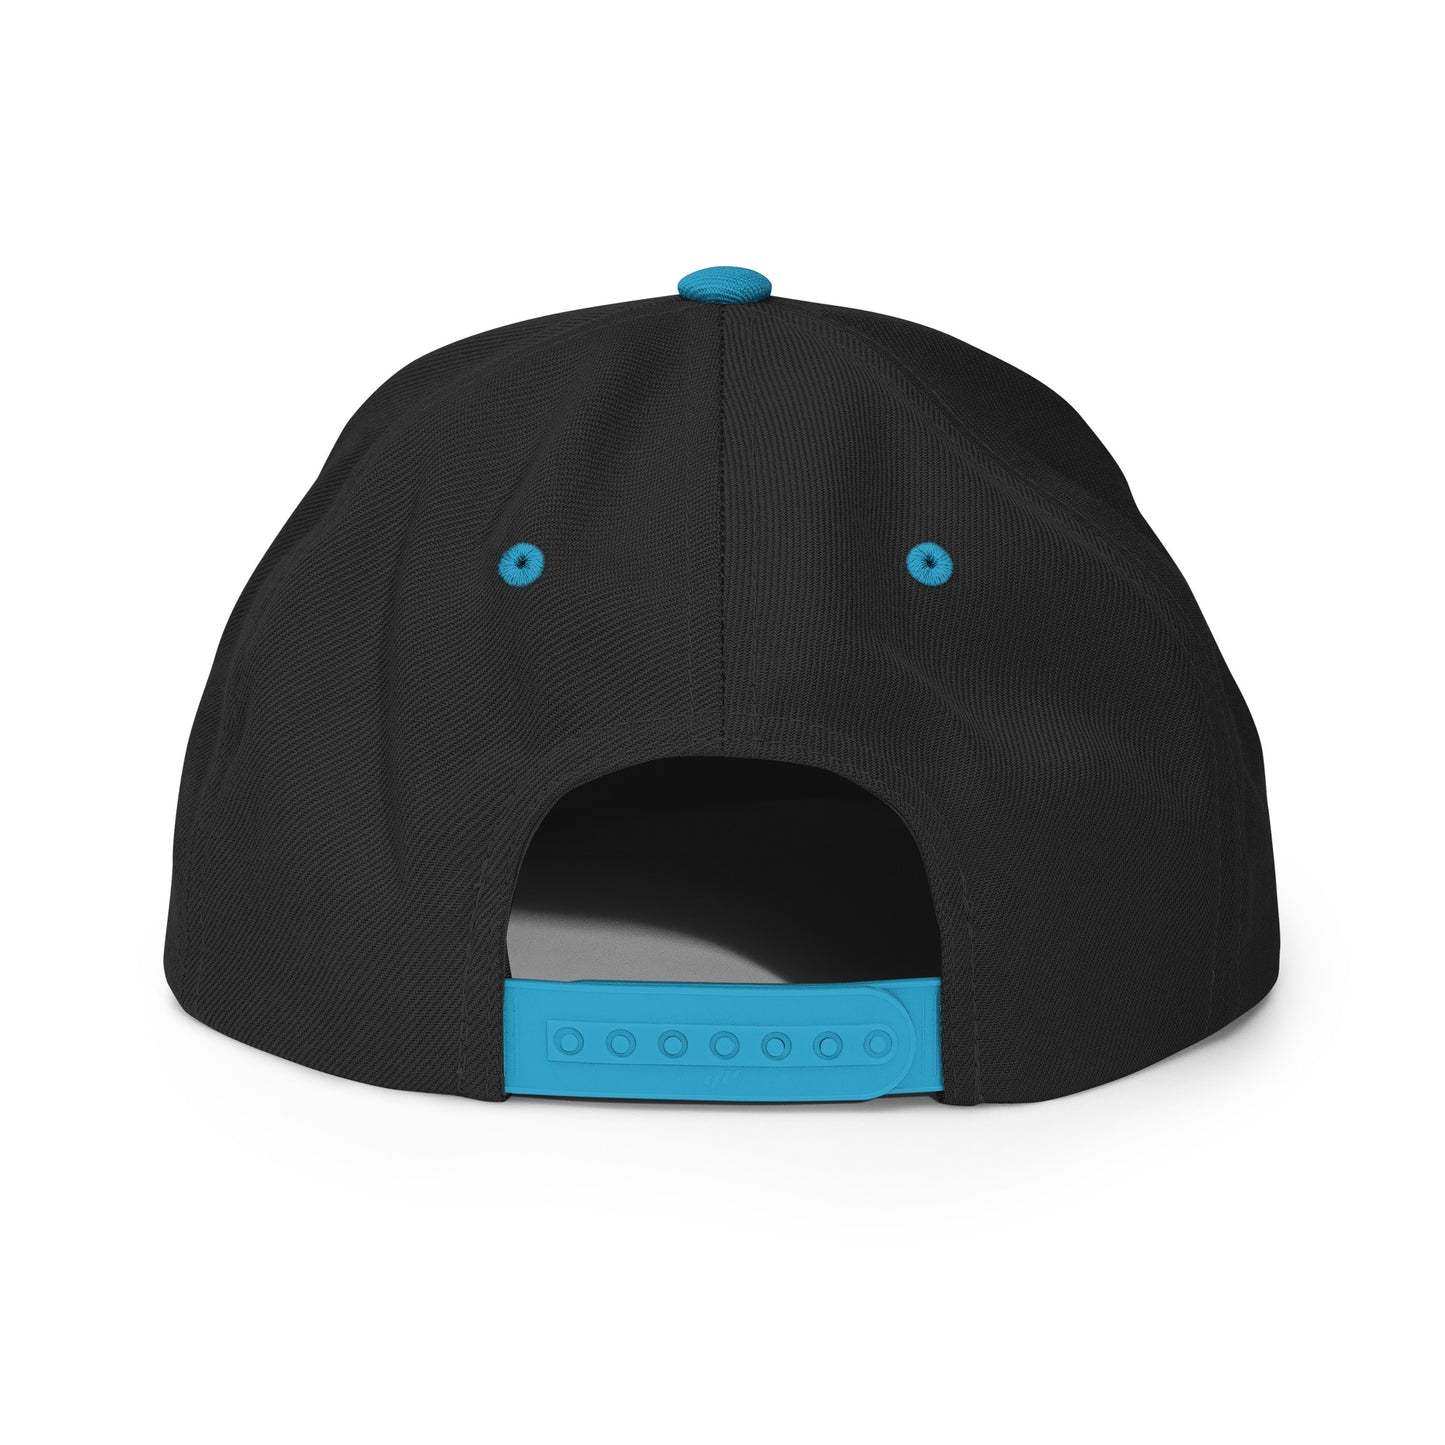 The Builder Sessions Snapback Hat